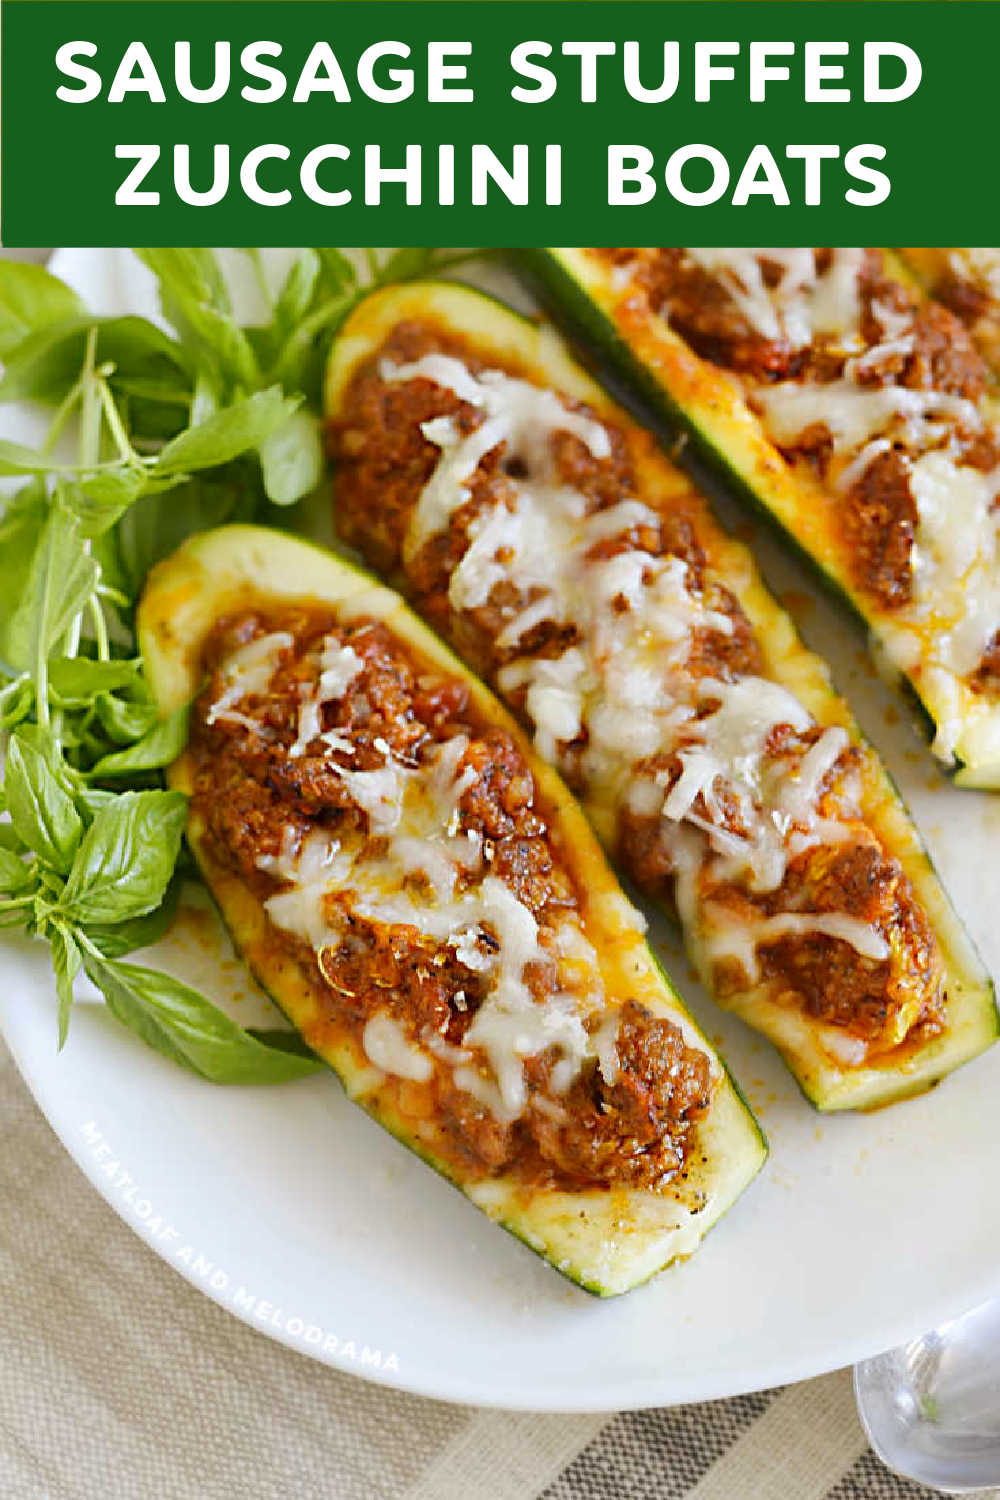 This easy recipe for Sausage Stuffed Zucchini Boats with Italian sausage in a cheesy tomato sauce makes a delicious low carb dinner the whole family will love! via @meamel